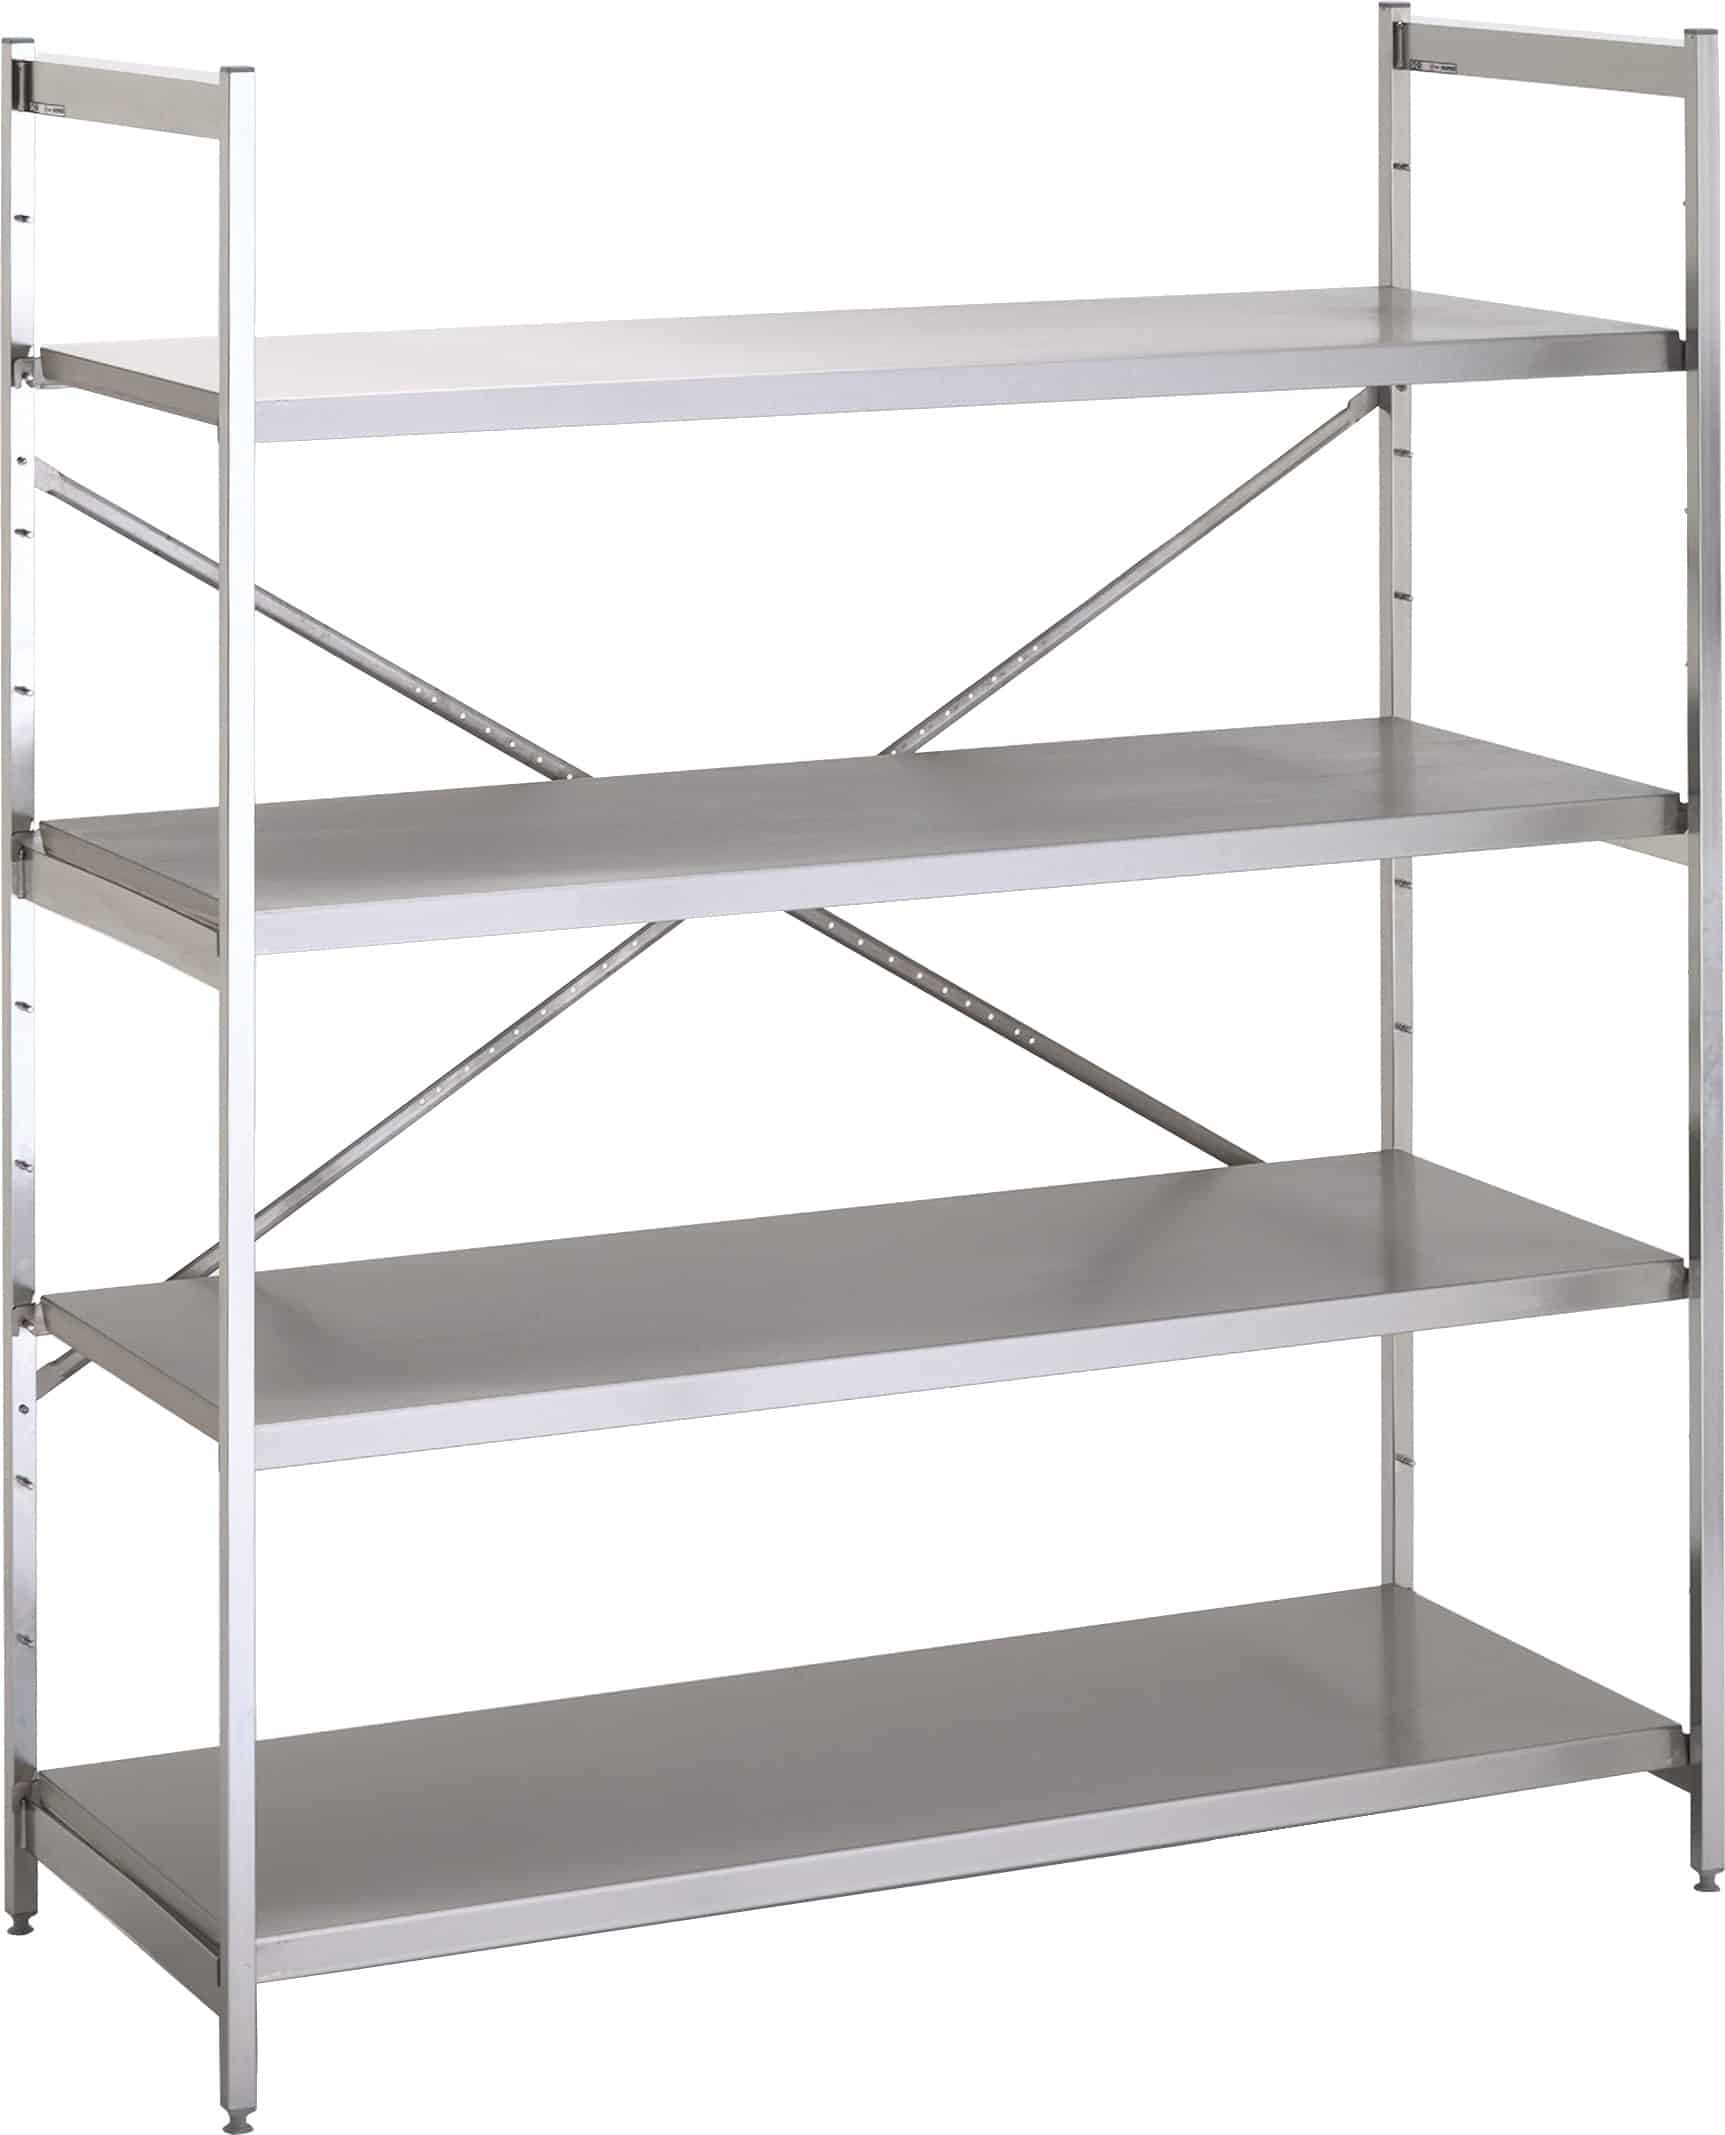 Stainless steel solid modular shelving unit